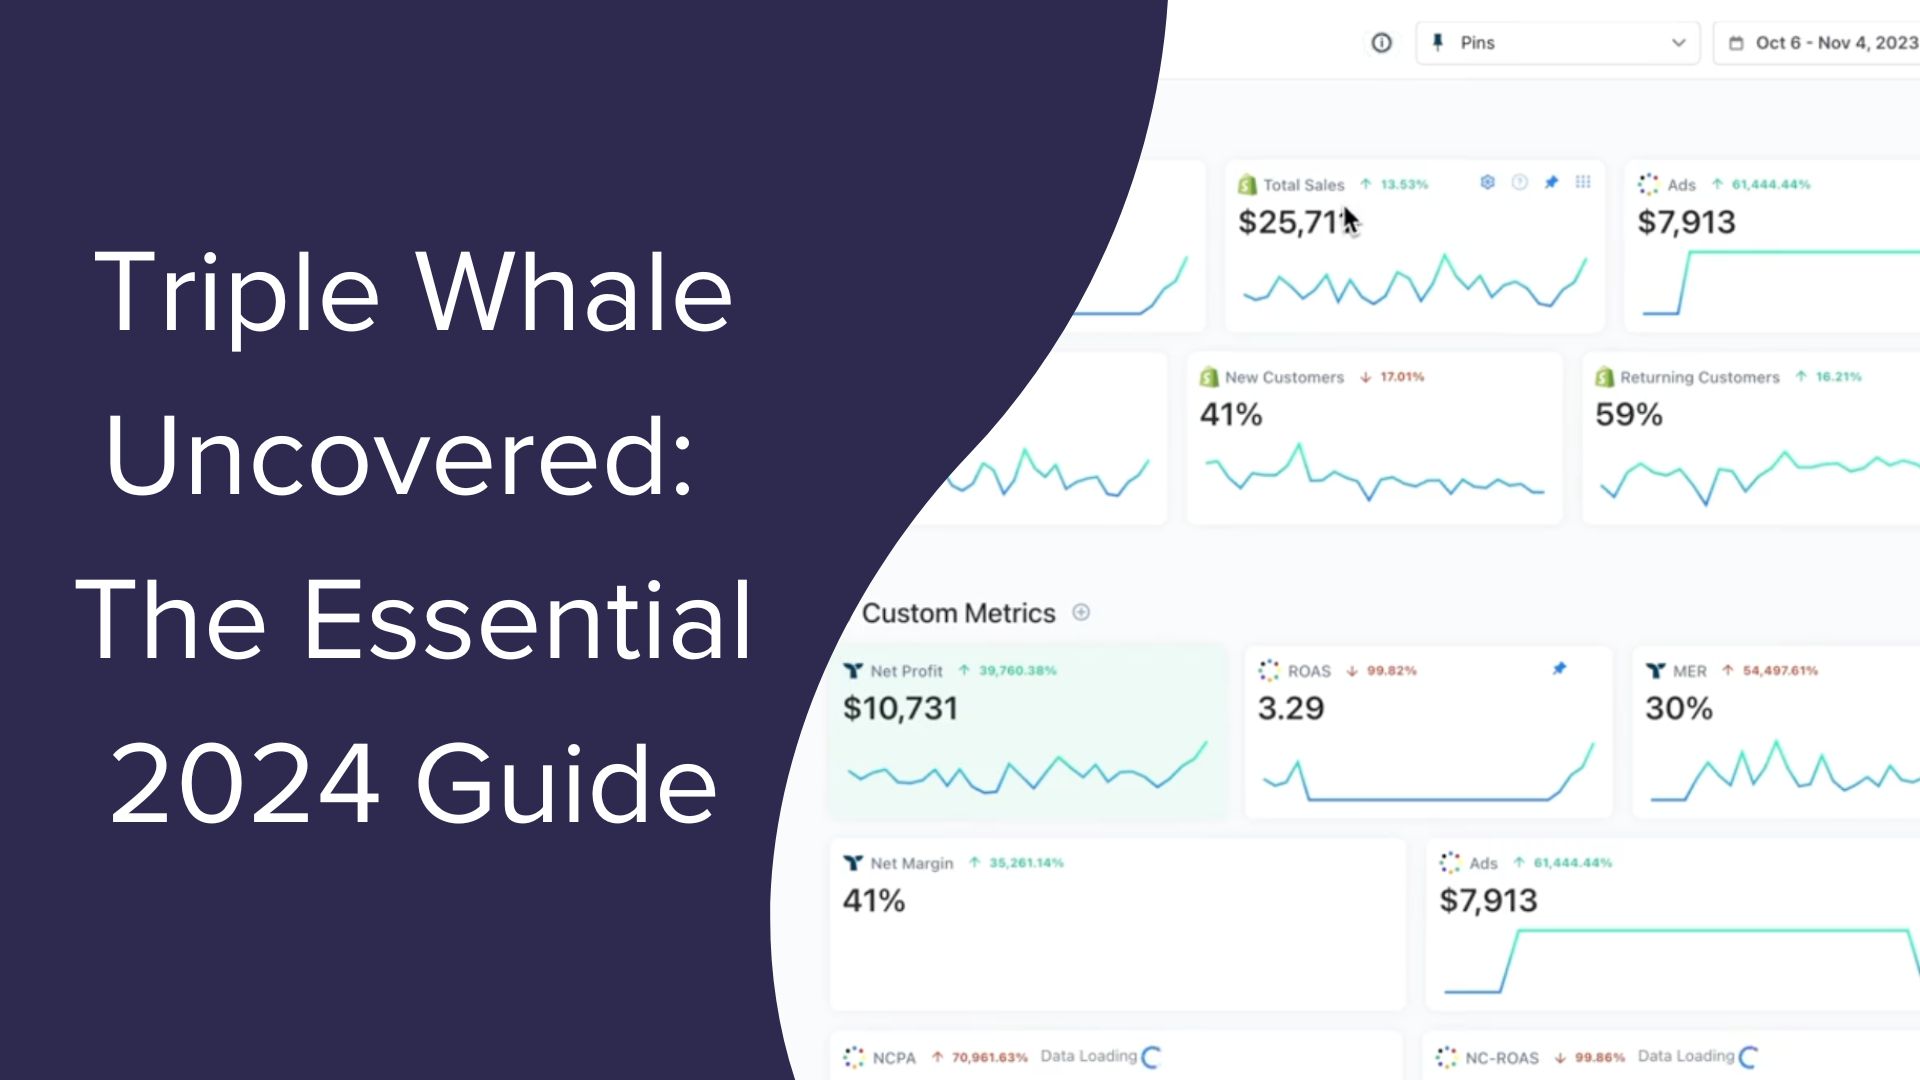 Triple Whale Uncovered: The Essential 2024 Guide